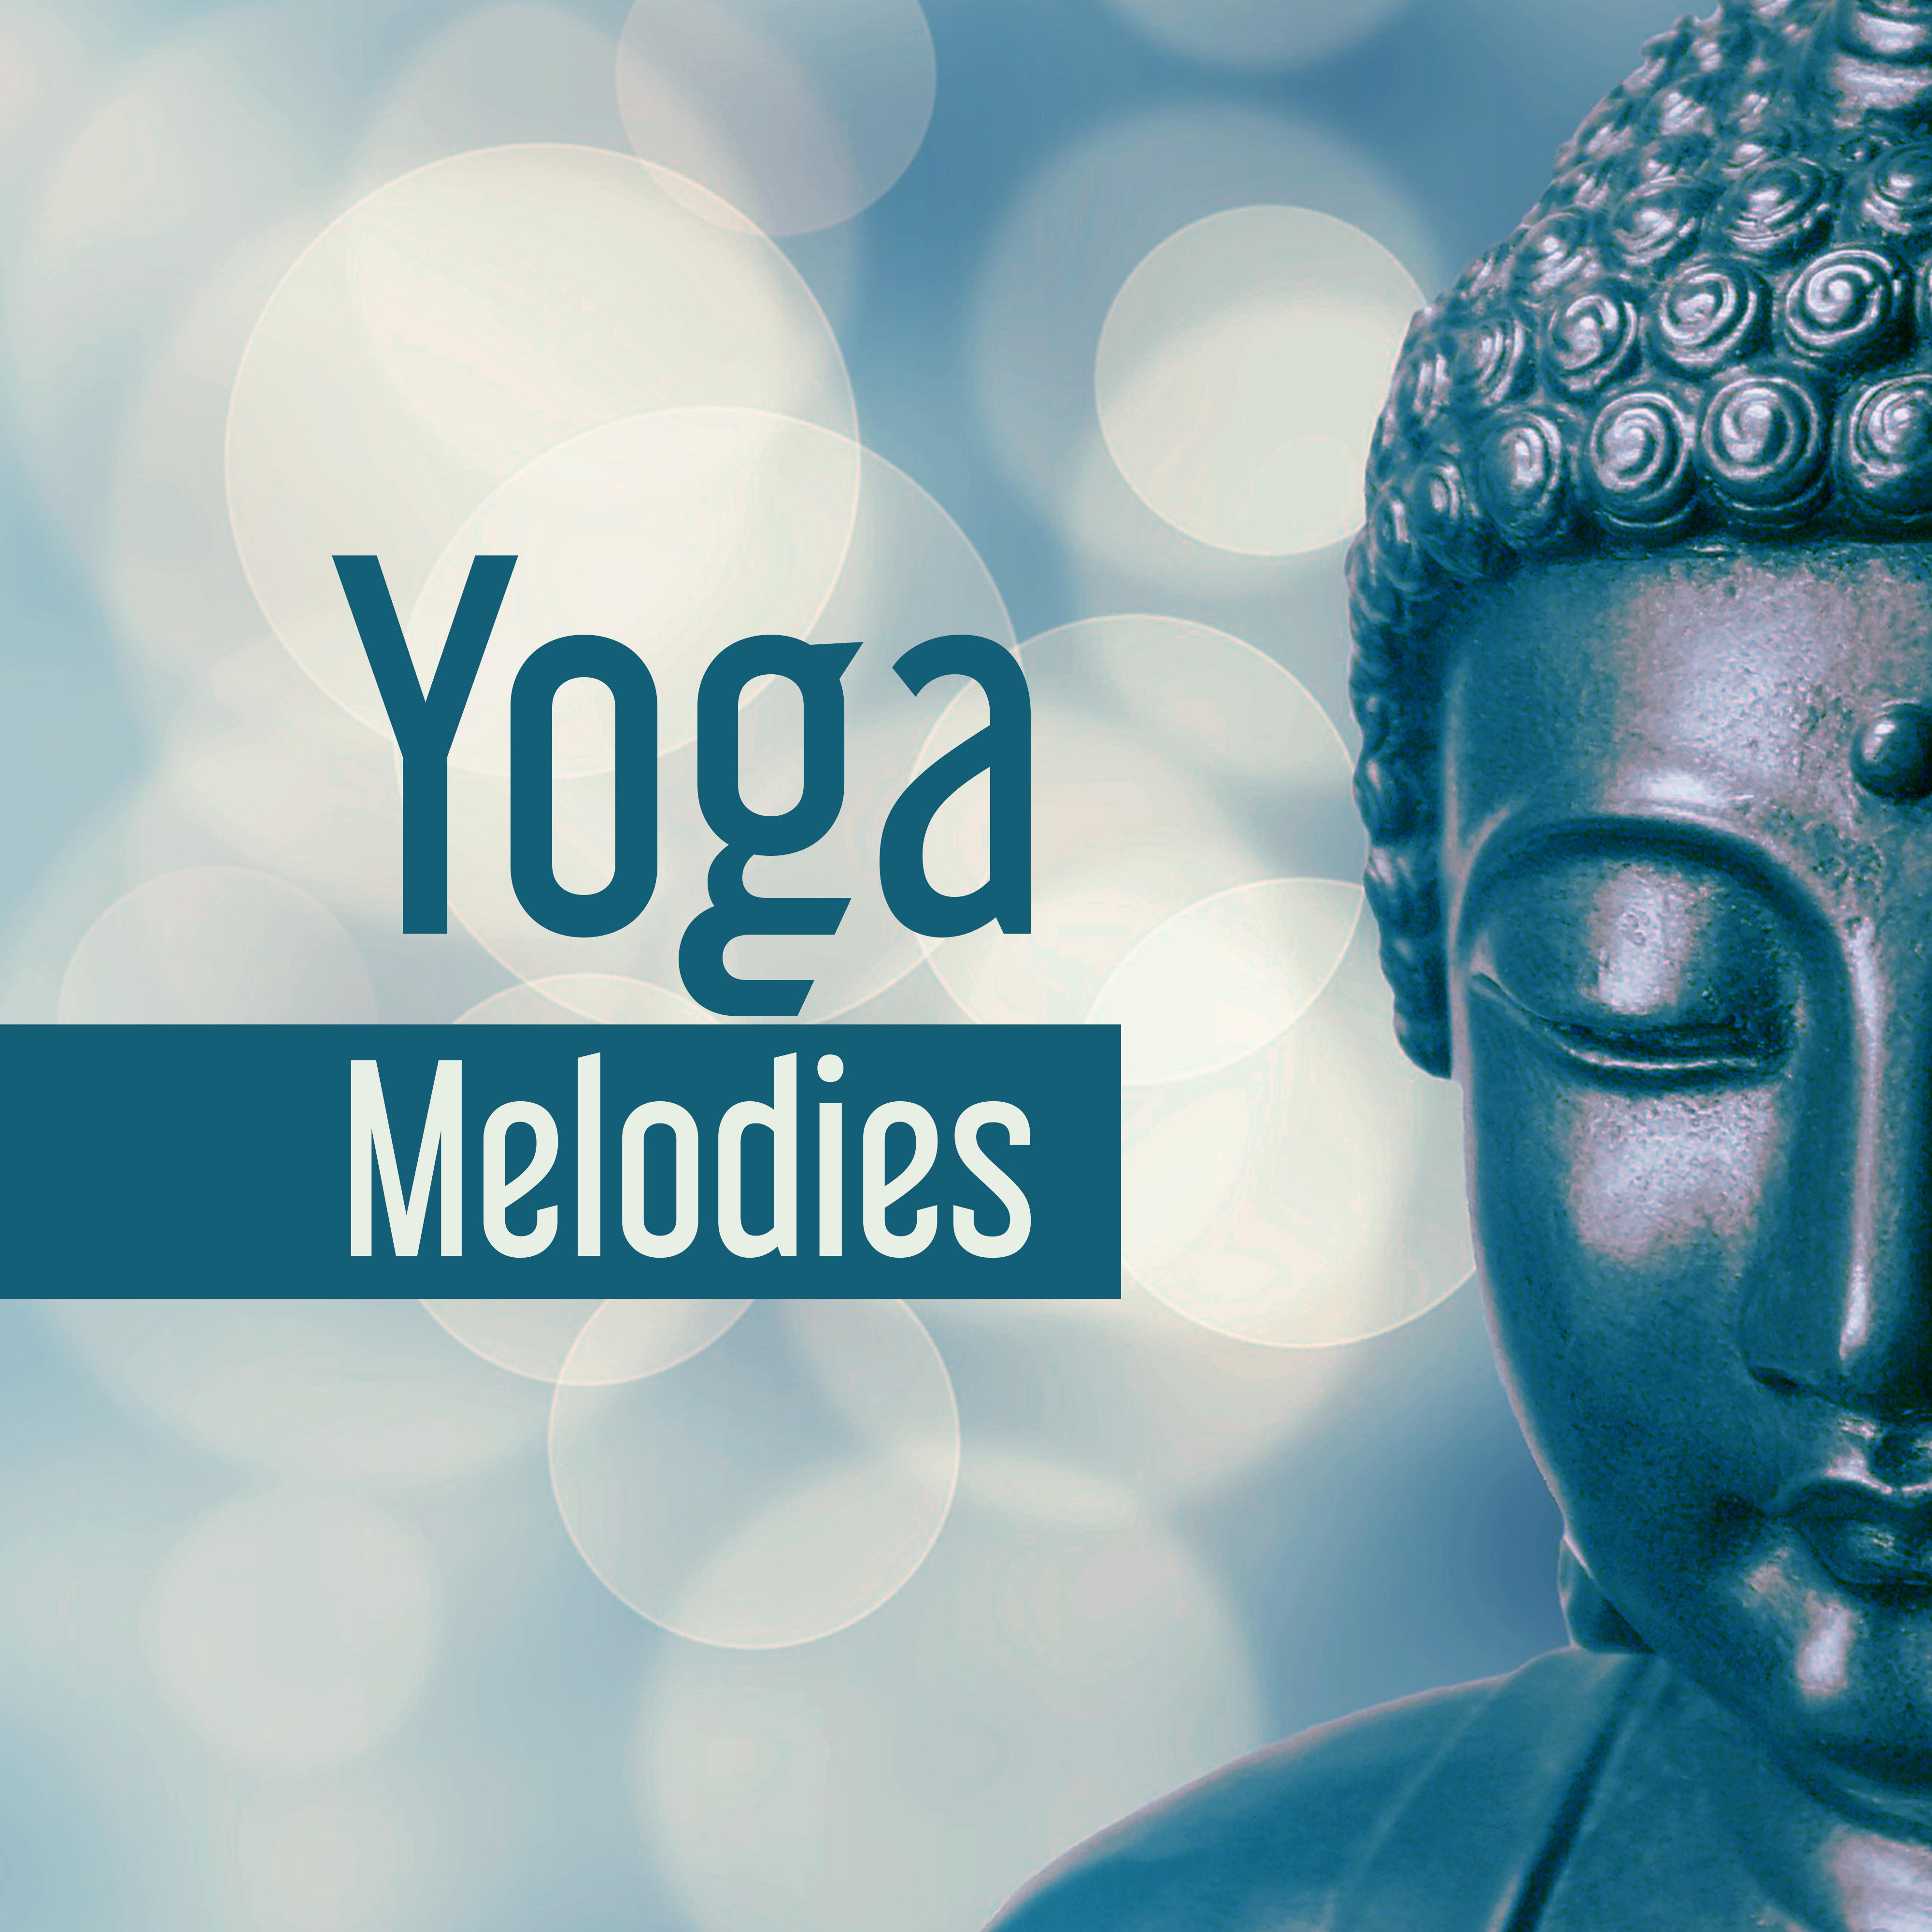 Yoga Melodies  The Greatest Relaxing Sounds for Yoga Practice, Meditation Background, Music for Yoga